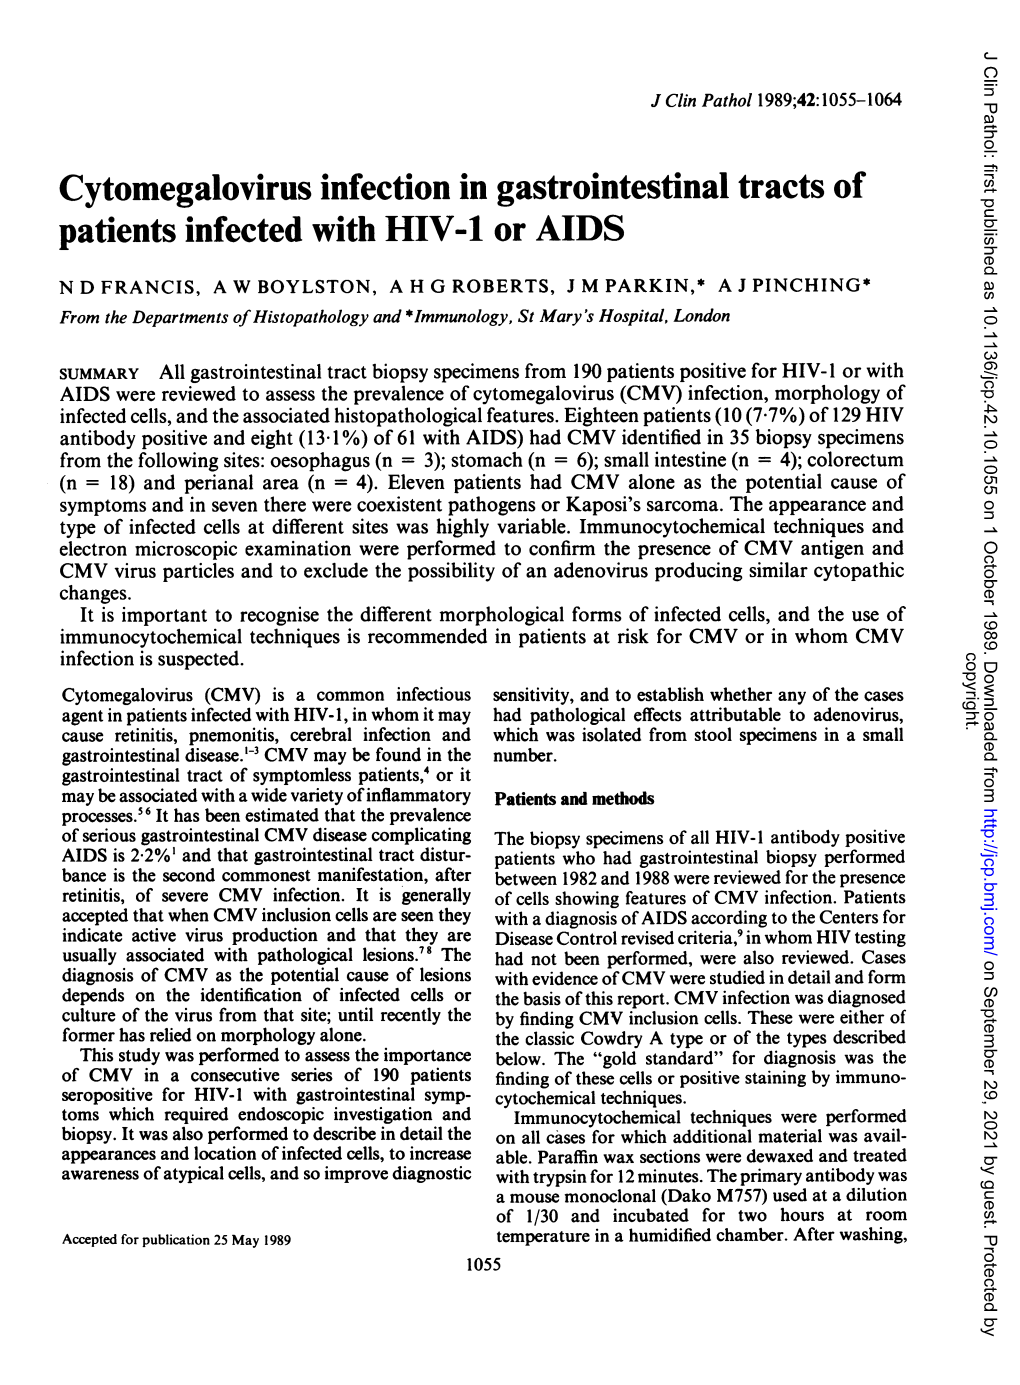 Cytomegalovirus Infection in Gastrointestinal Tracts of Patients Infected with HIV-1 Or AIDS